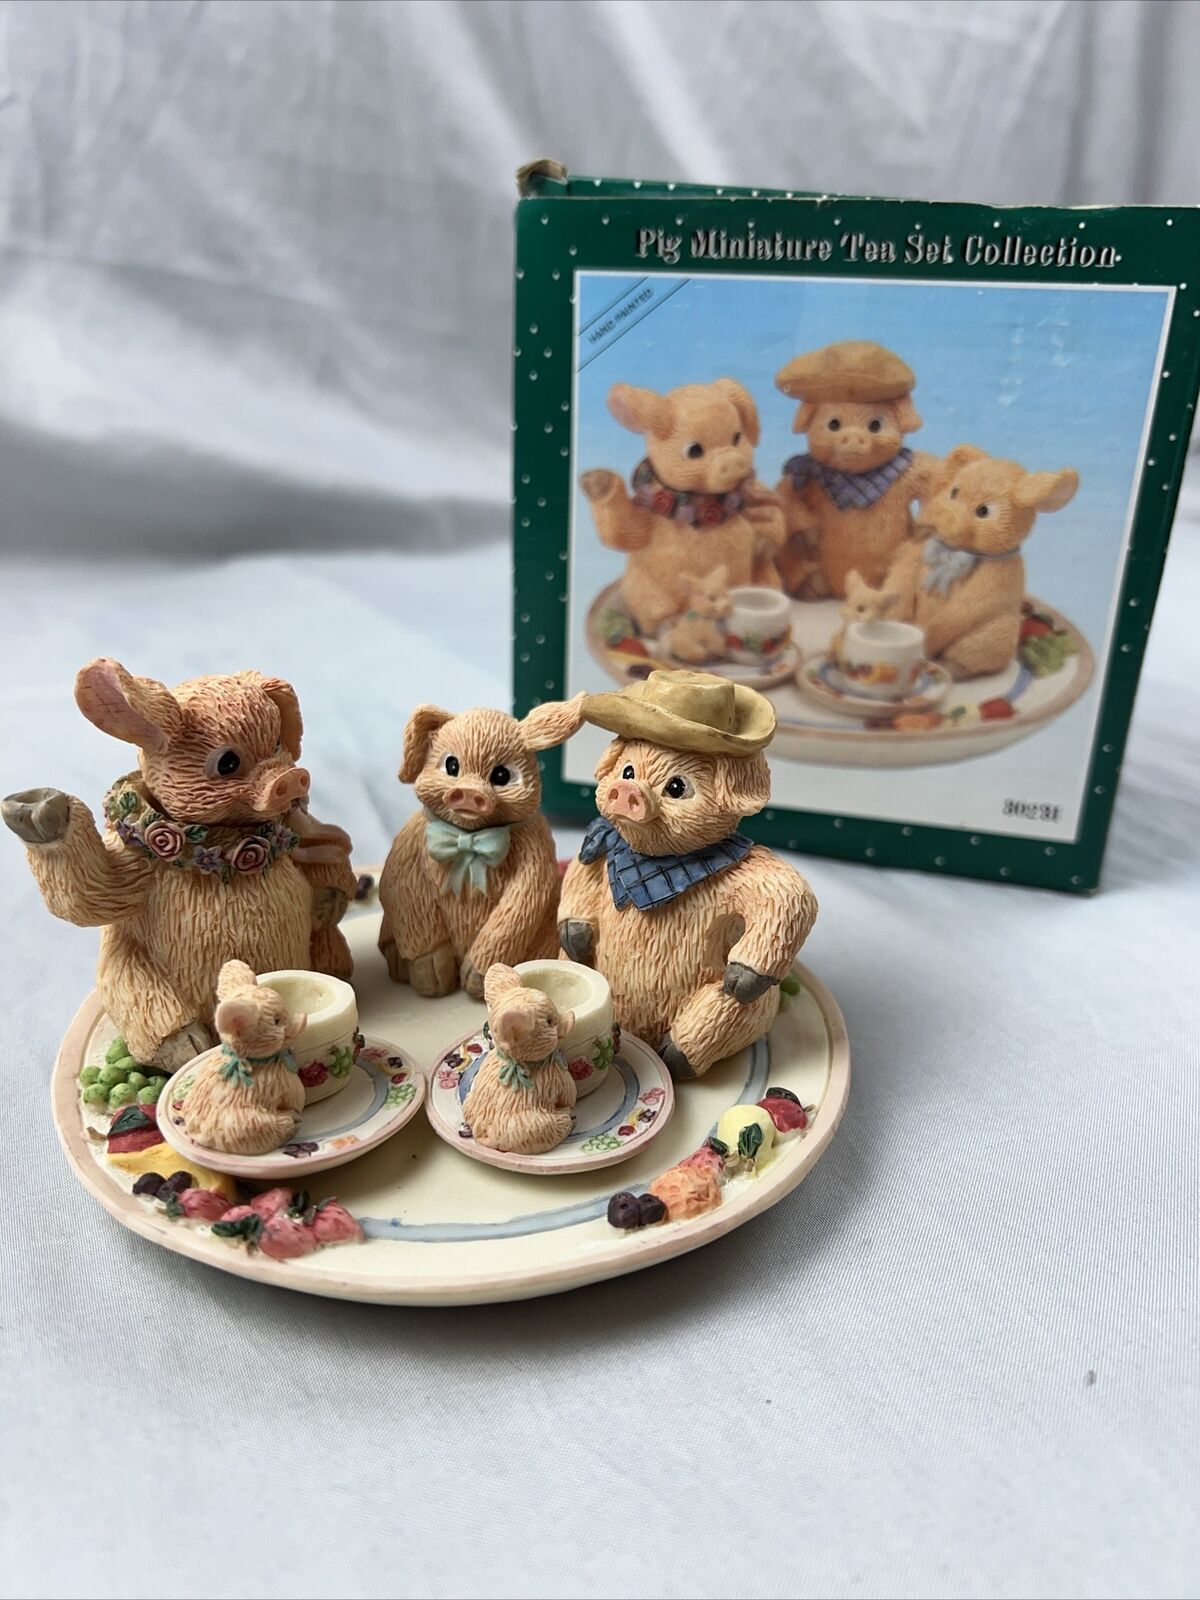 1995 Pig Picnic Miniature Tea Set Collection Hand Painted Young's Inc 10-piece